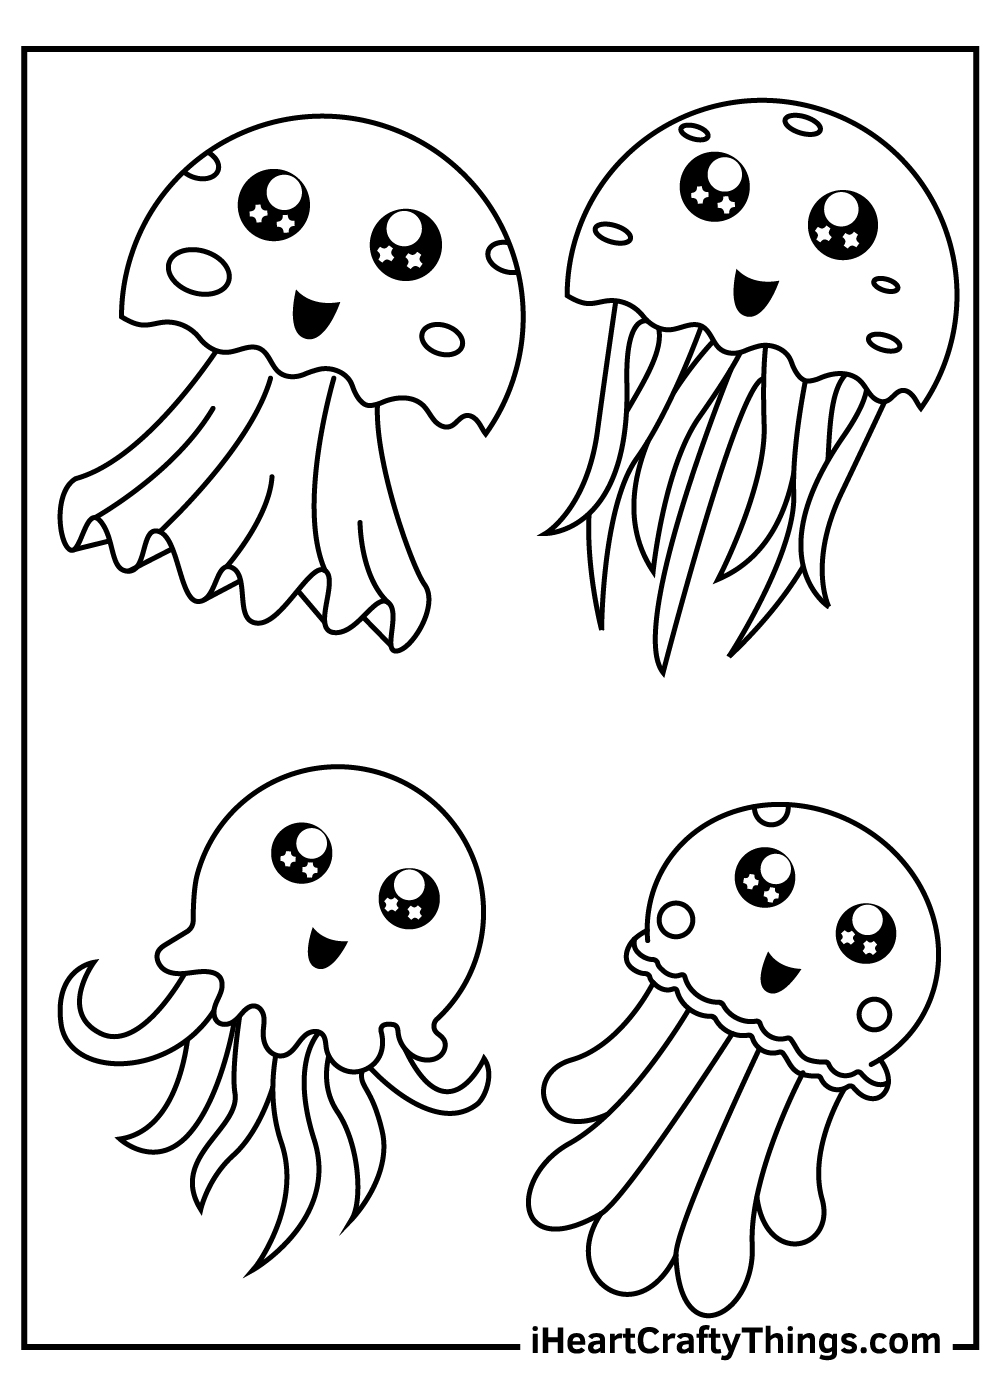 4 cute jellyfish coloring pages free printable